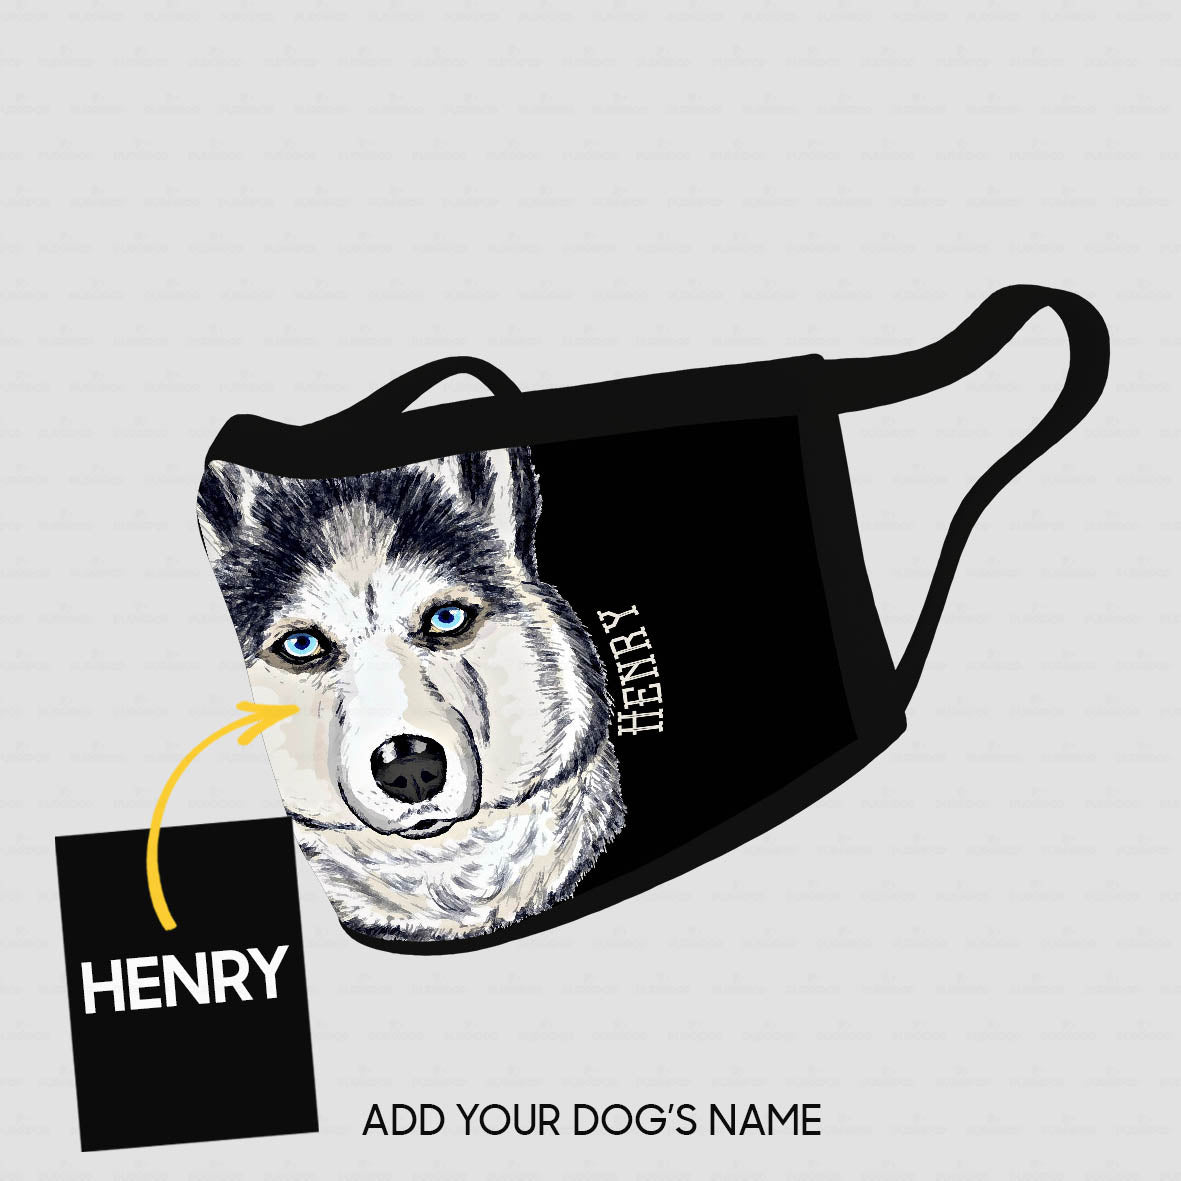 Personalized Dog Gift Idea - Black And White Husky For Dog Lovers - Cloth Mask